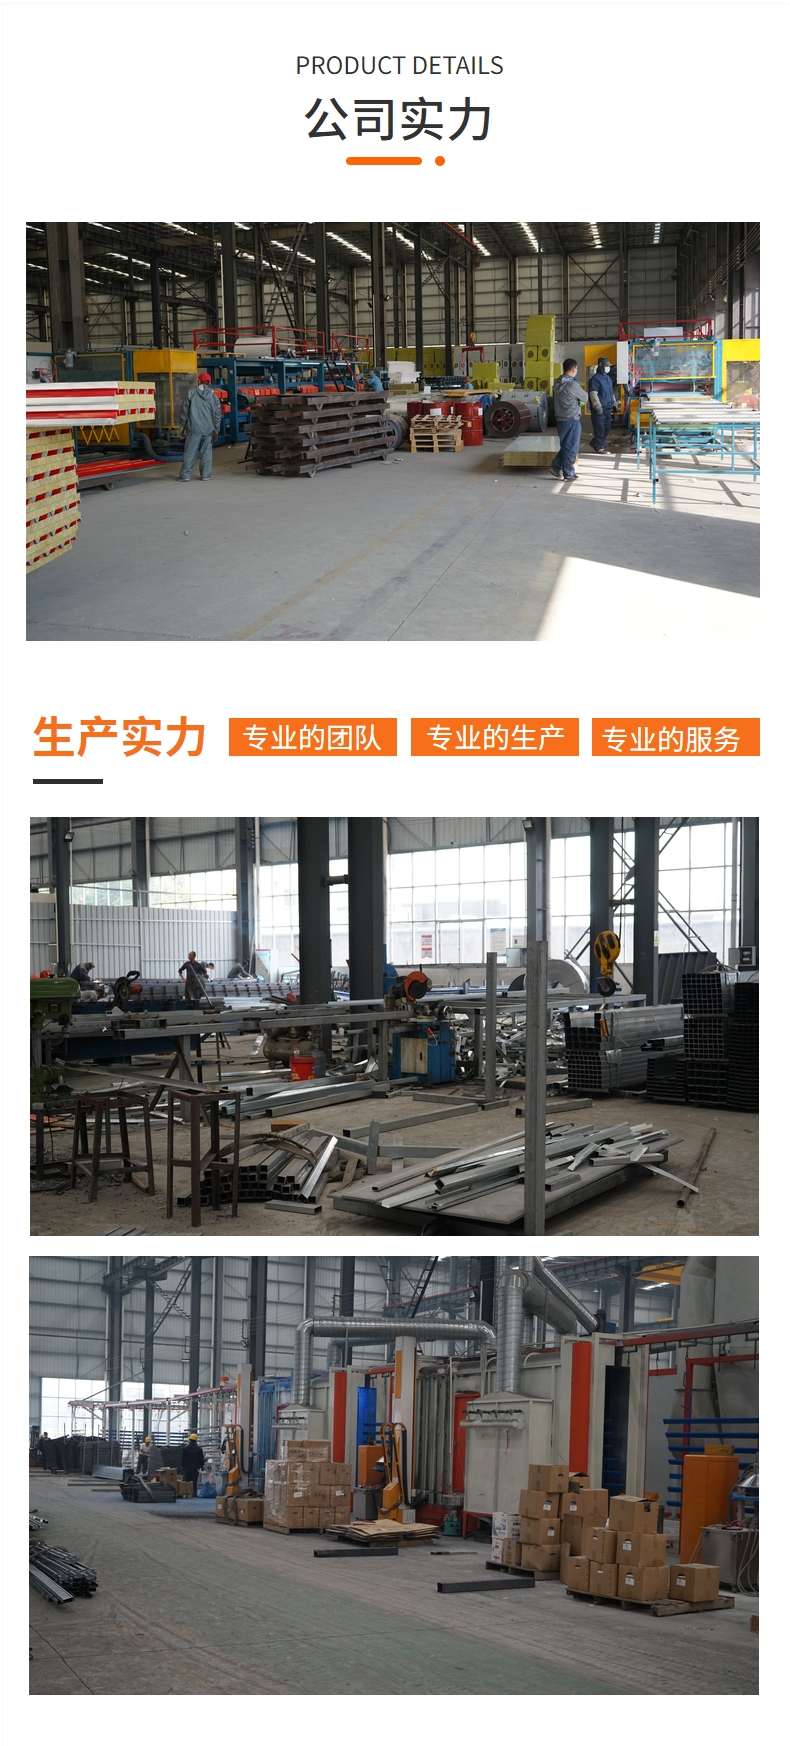 Fireproof rock wool activity room, C-shaped color steel plate splicing room, temporary house, toilet, canteen, temporary room, work shed